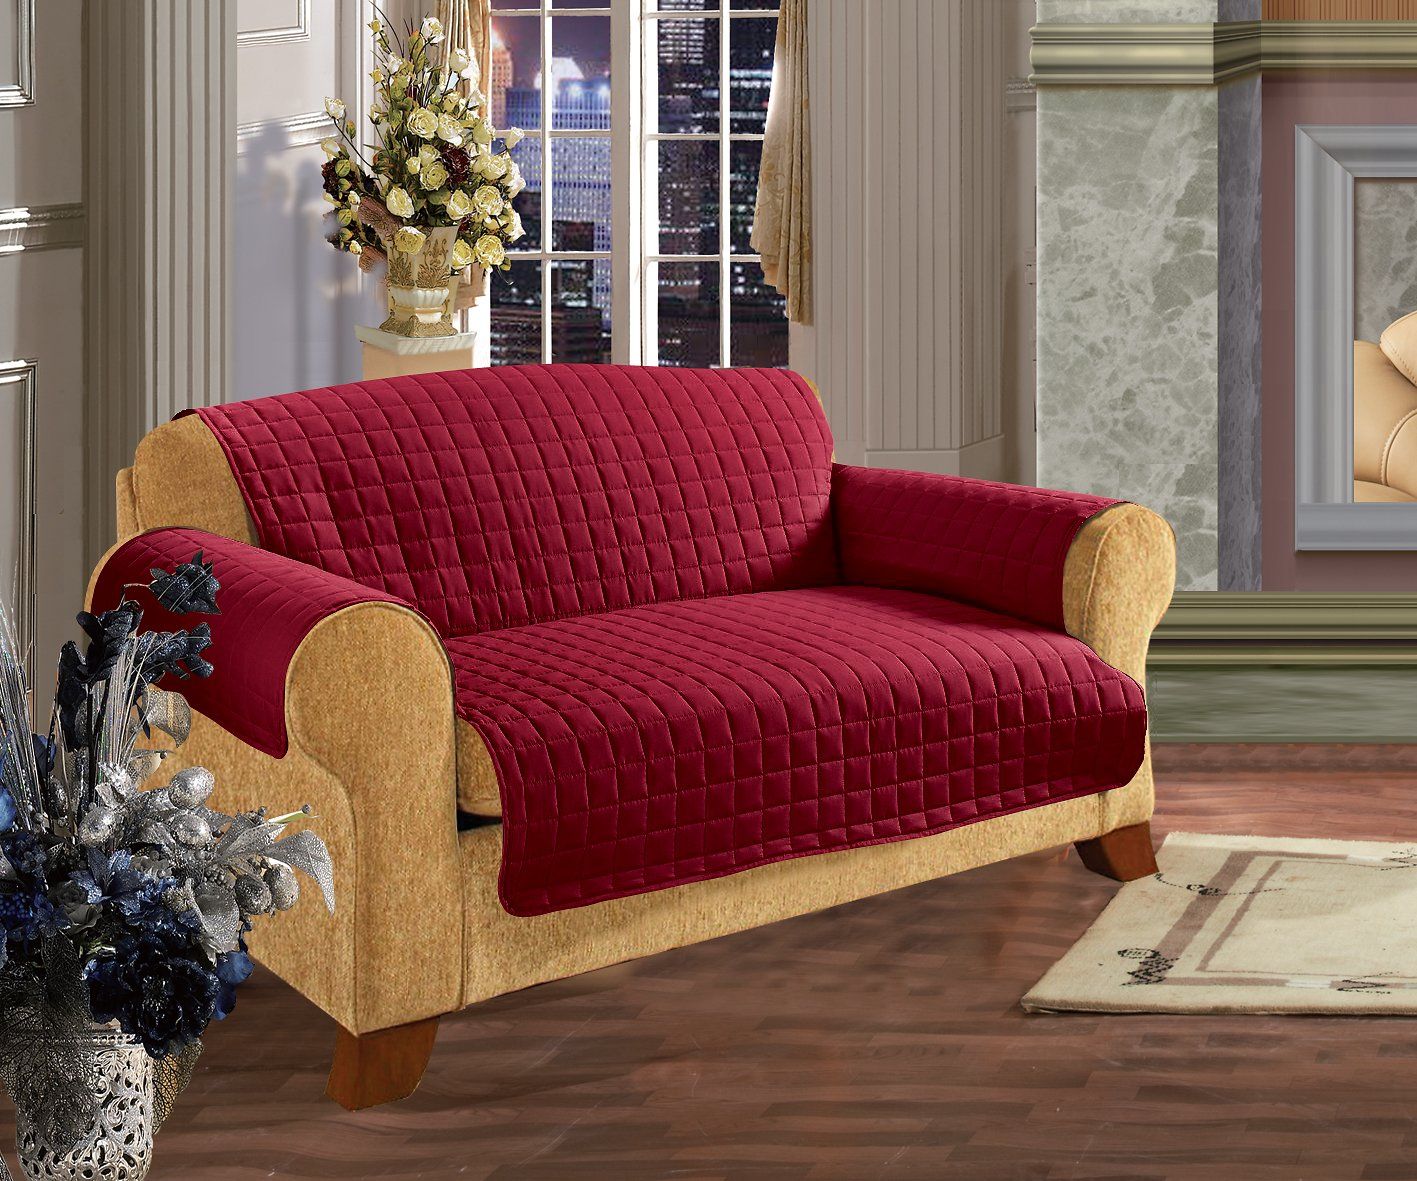 Elegant Comfort Reversible Quilted Sofa Cover, Burgundy Intended For Elegant Sofas And Chairs (View 11 of 15)